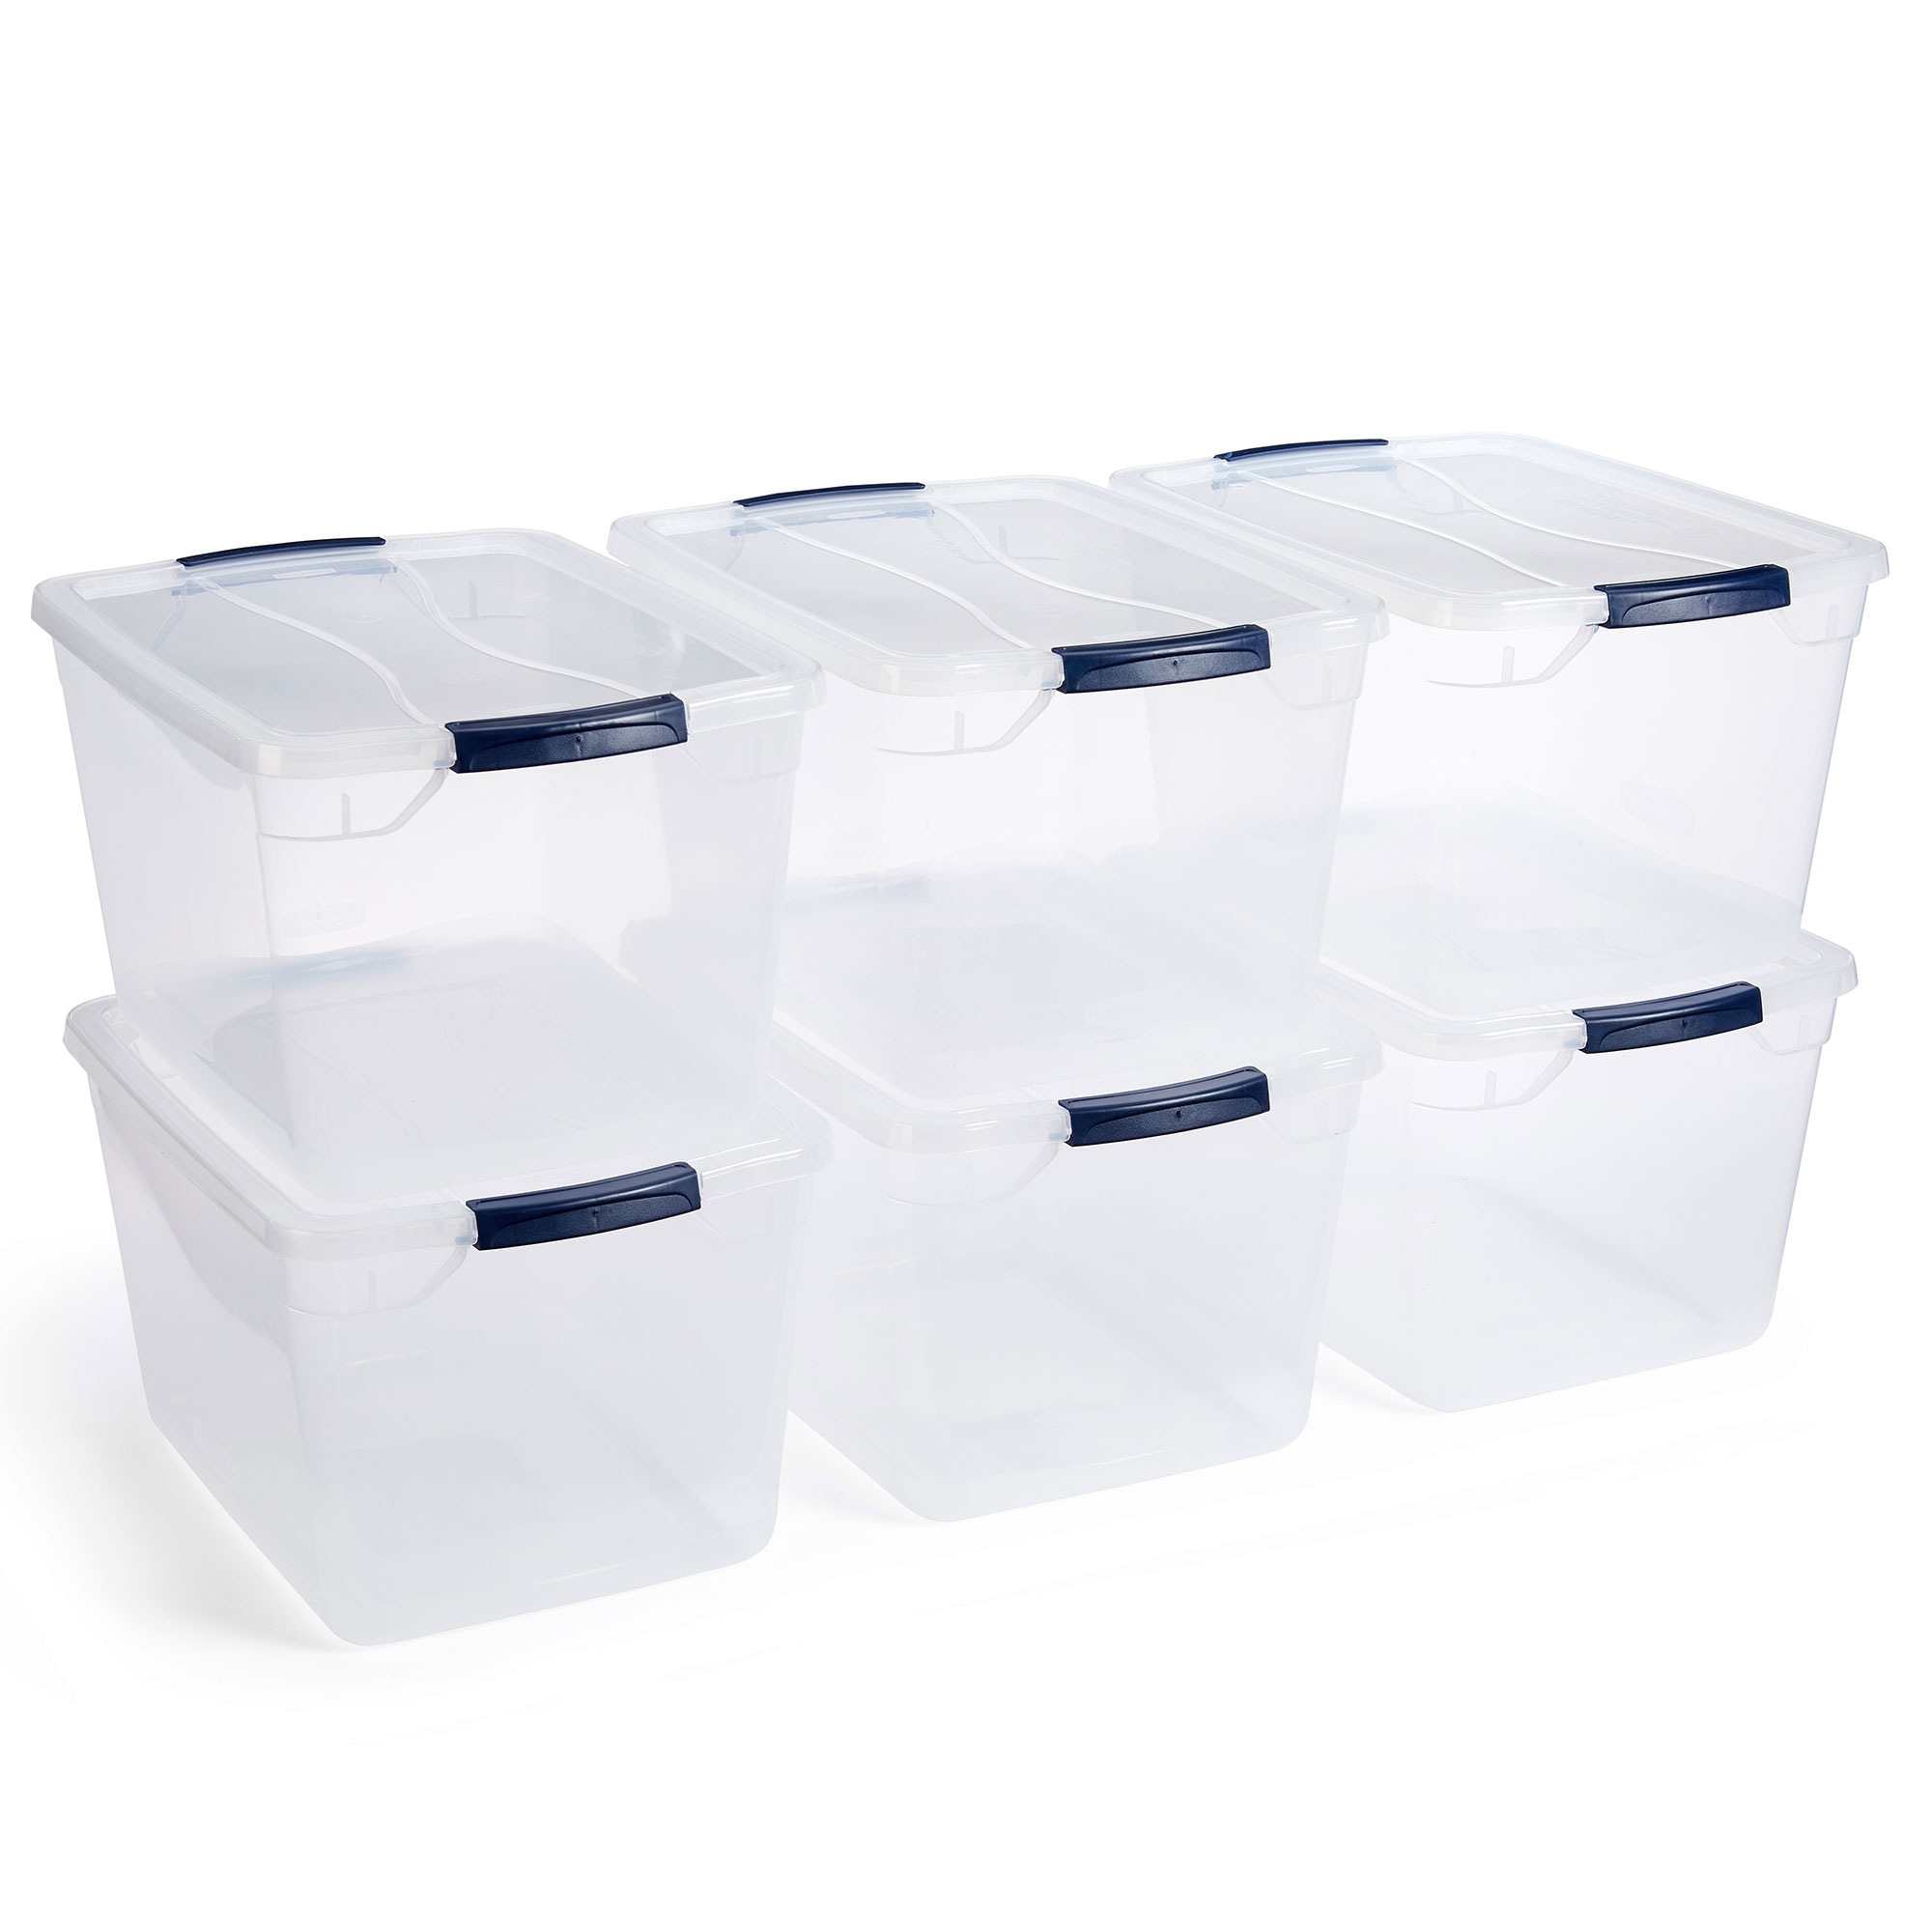 https://ak1.ostkcdn.com/images/products/is/images/direct/c43d344fa781321bf715b55757e64ed7a1c52308/Rubbermaid-Cleverstore-30-Quart-Plastic-Storage-Tote-Container-with-Lid-%286-Pack%29.jpg